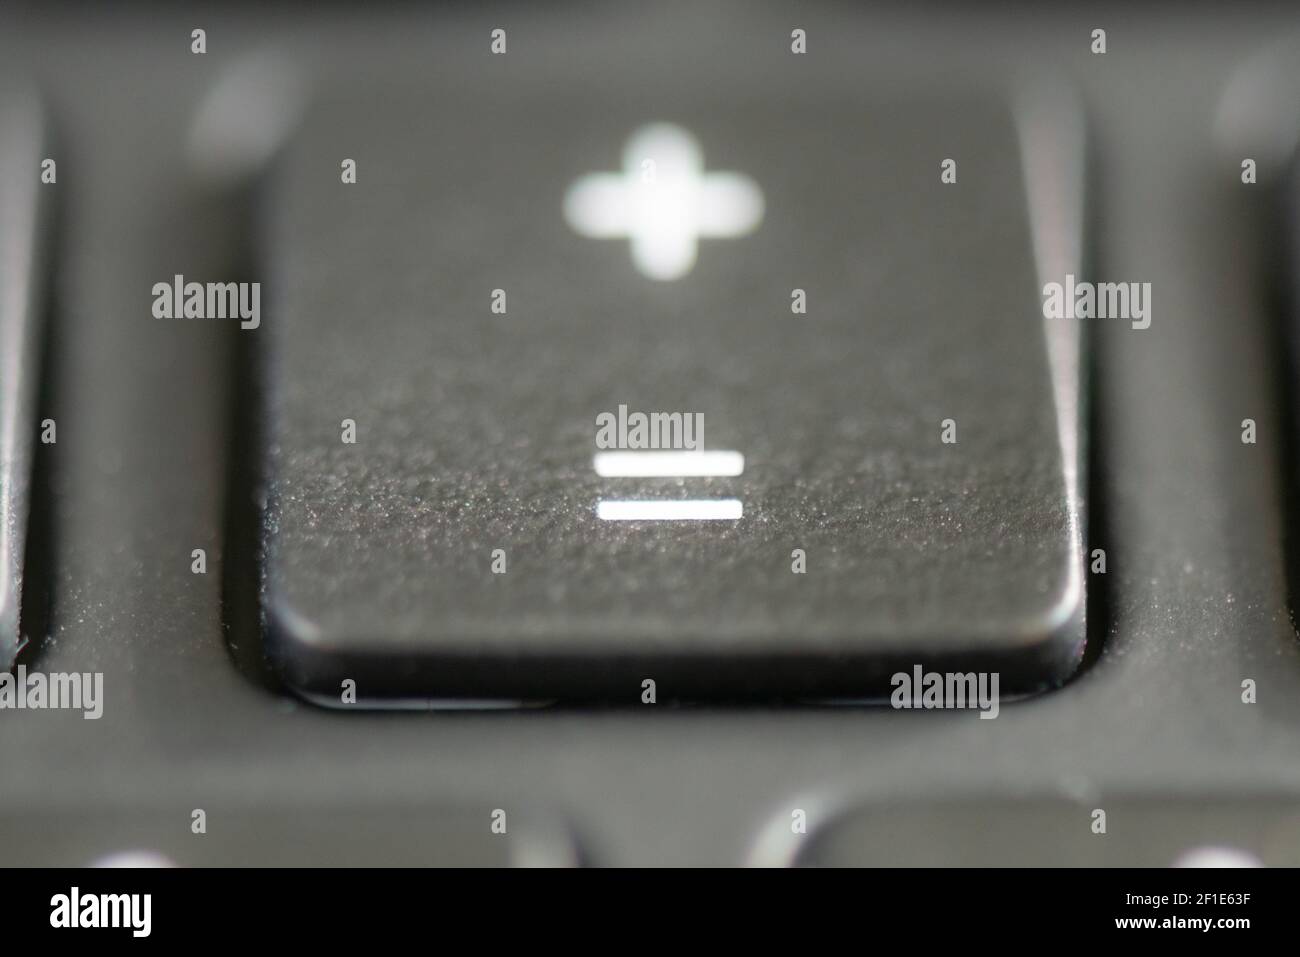 Equals and plus key on a laptop keyboard Stock Photo - Alamy